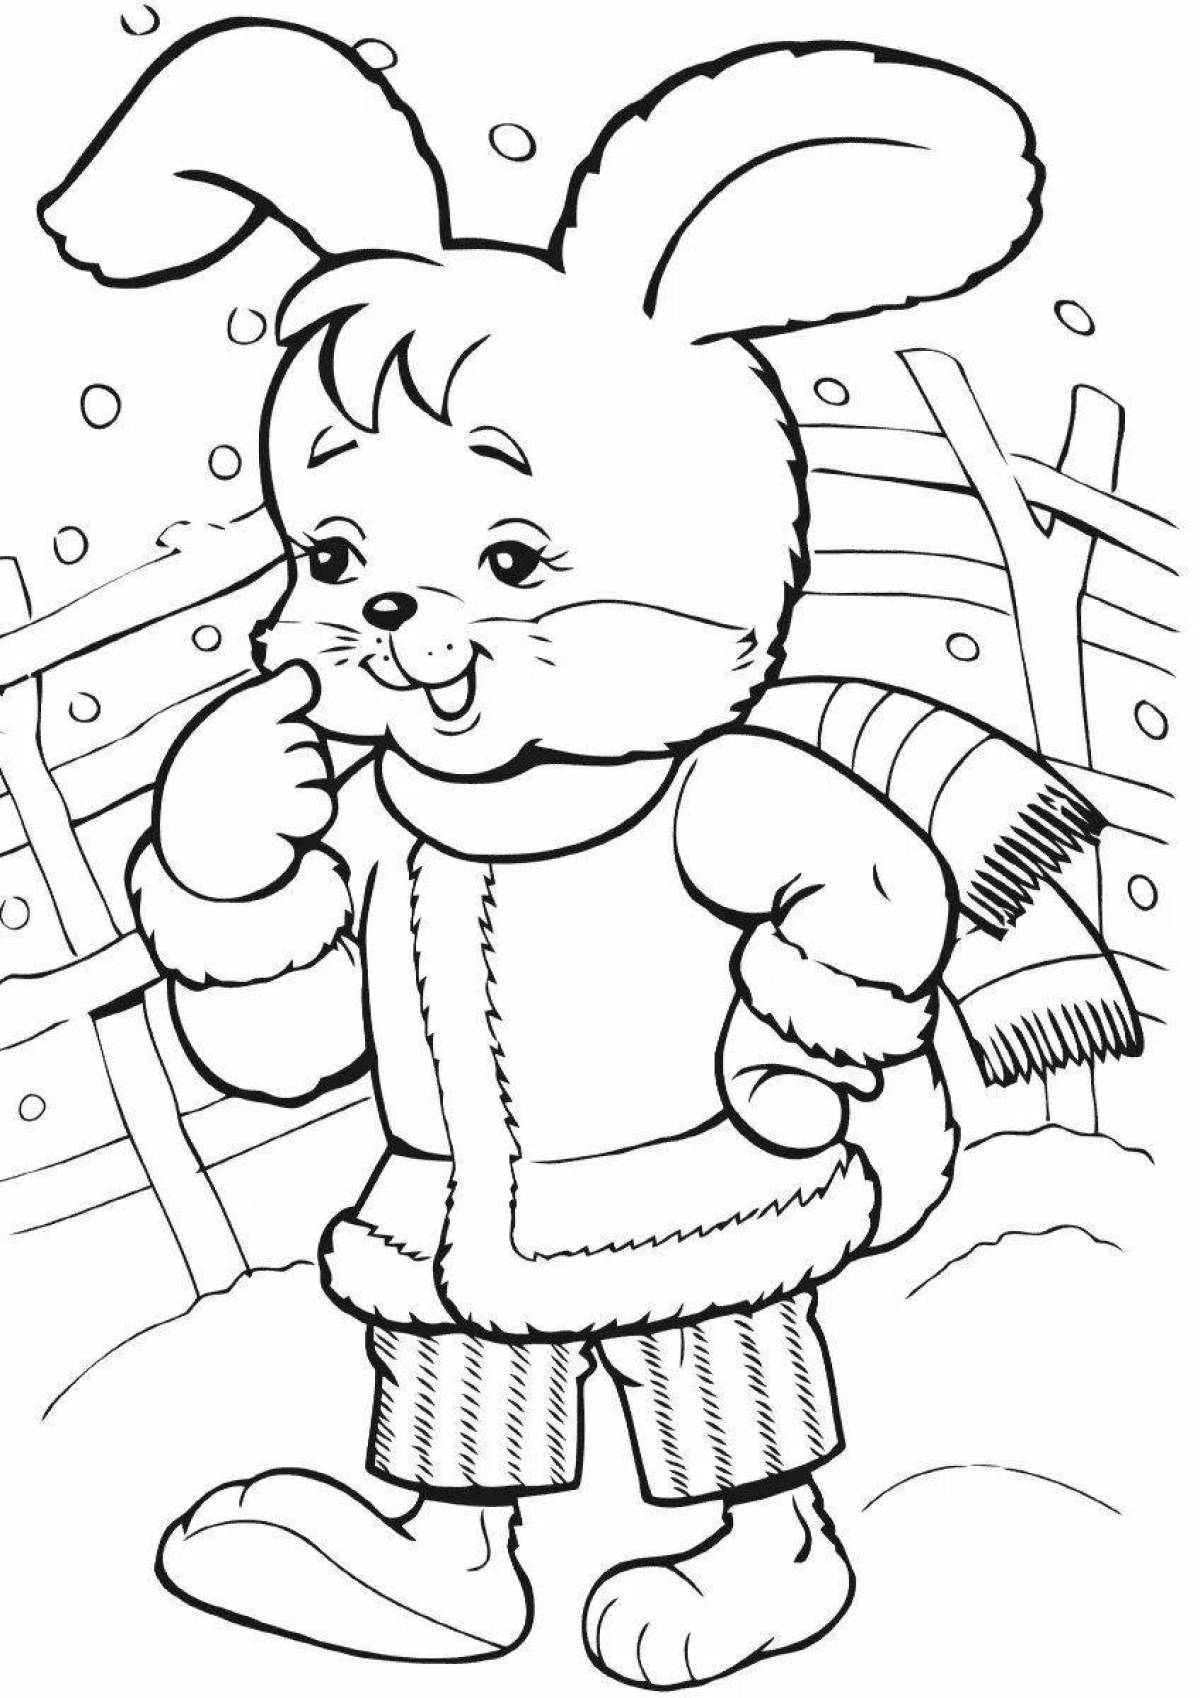 Coloring book glowing bouncer hare